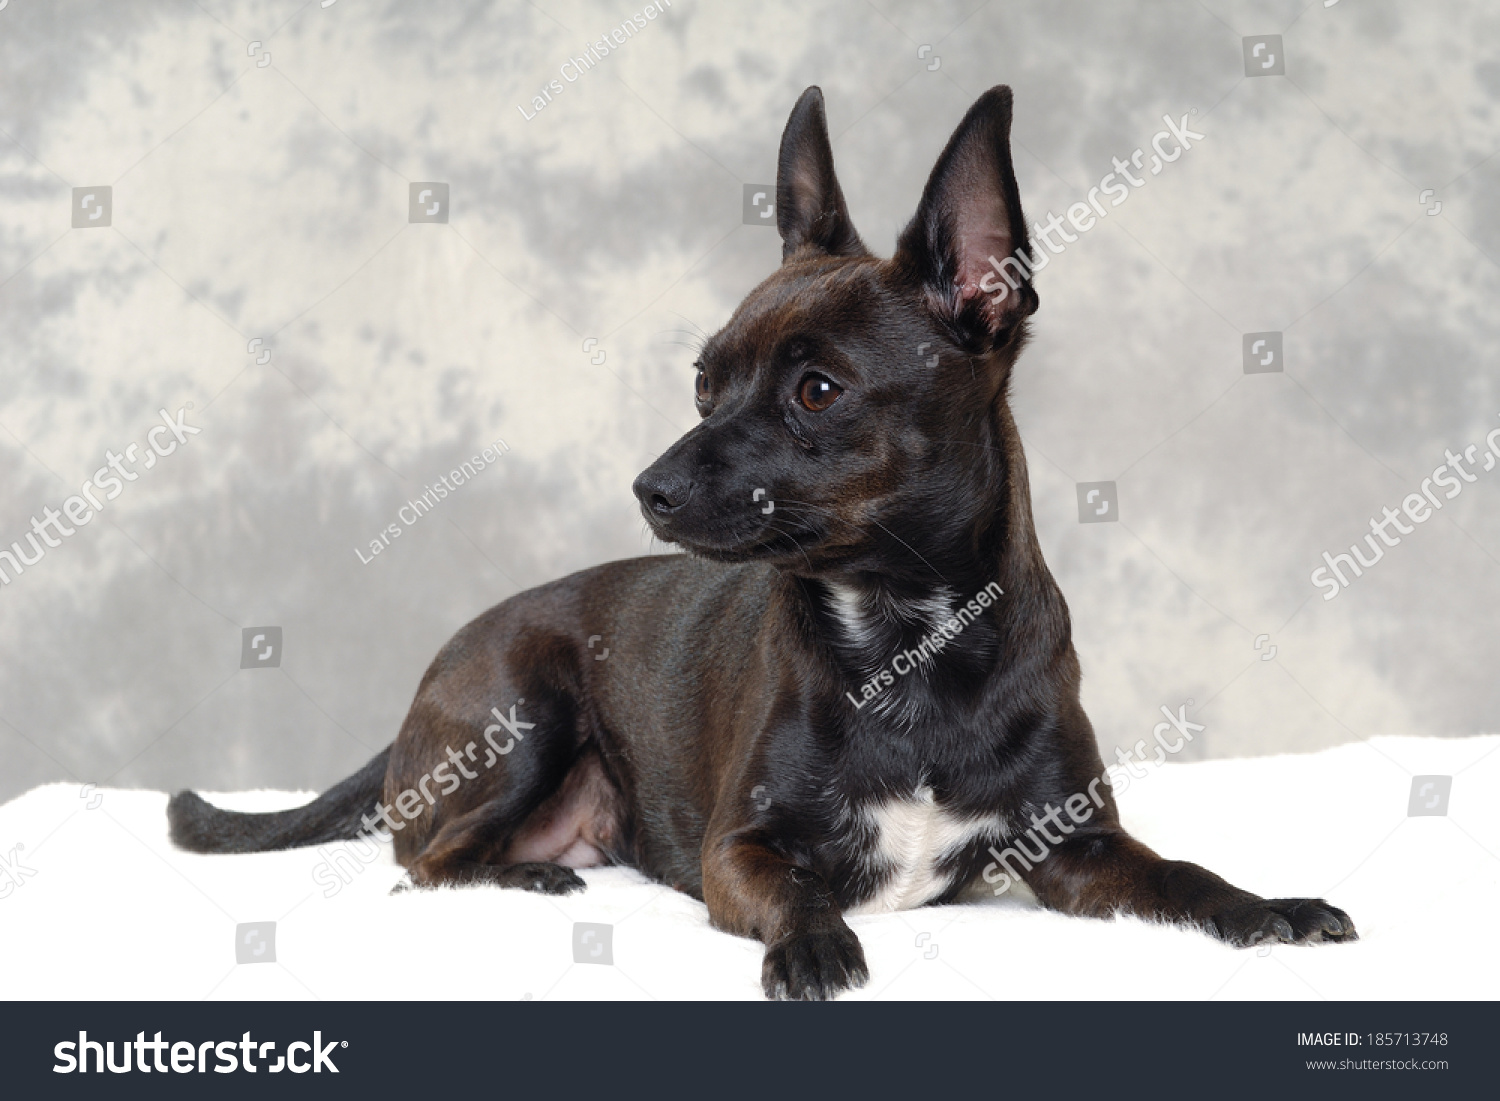 Smalle Black Puppy Dog Resting Breede Miscellaneous Stock Image 185713748